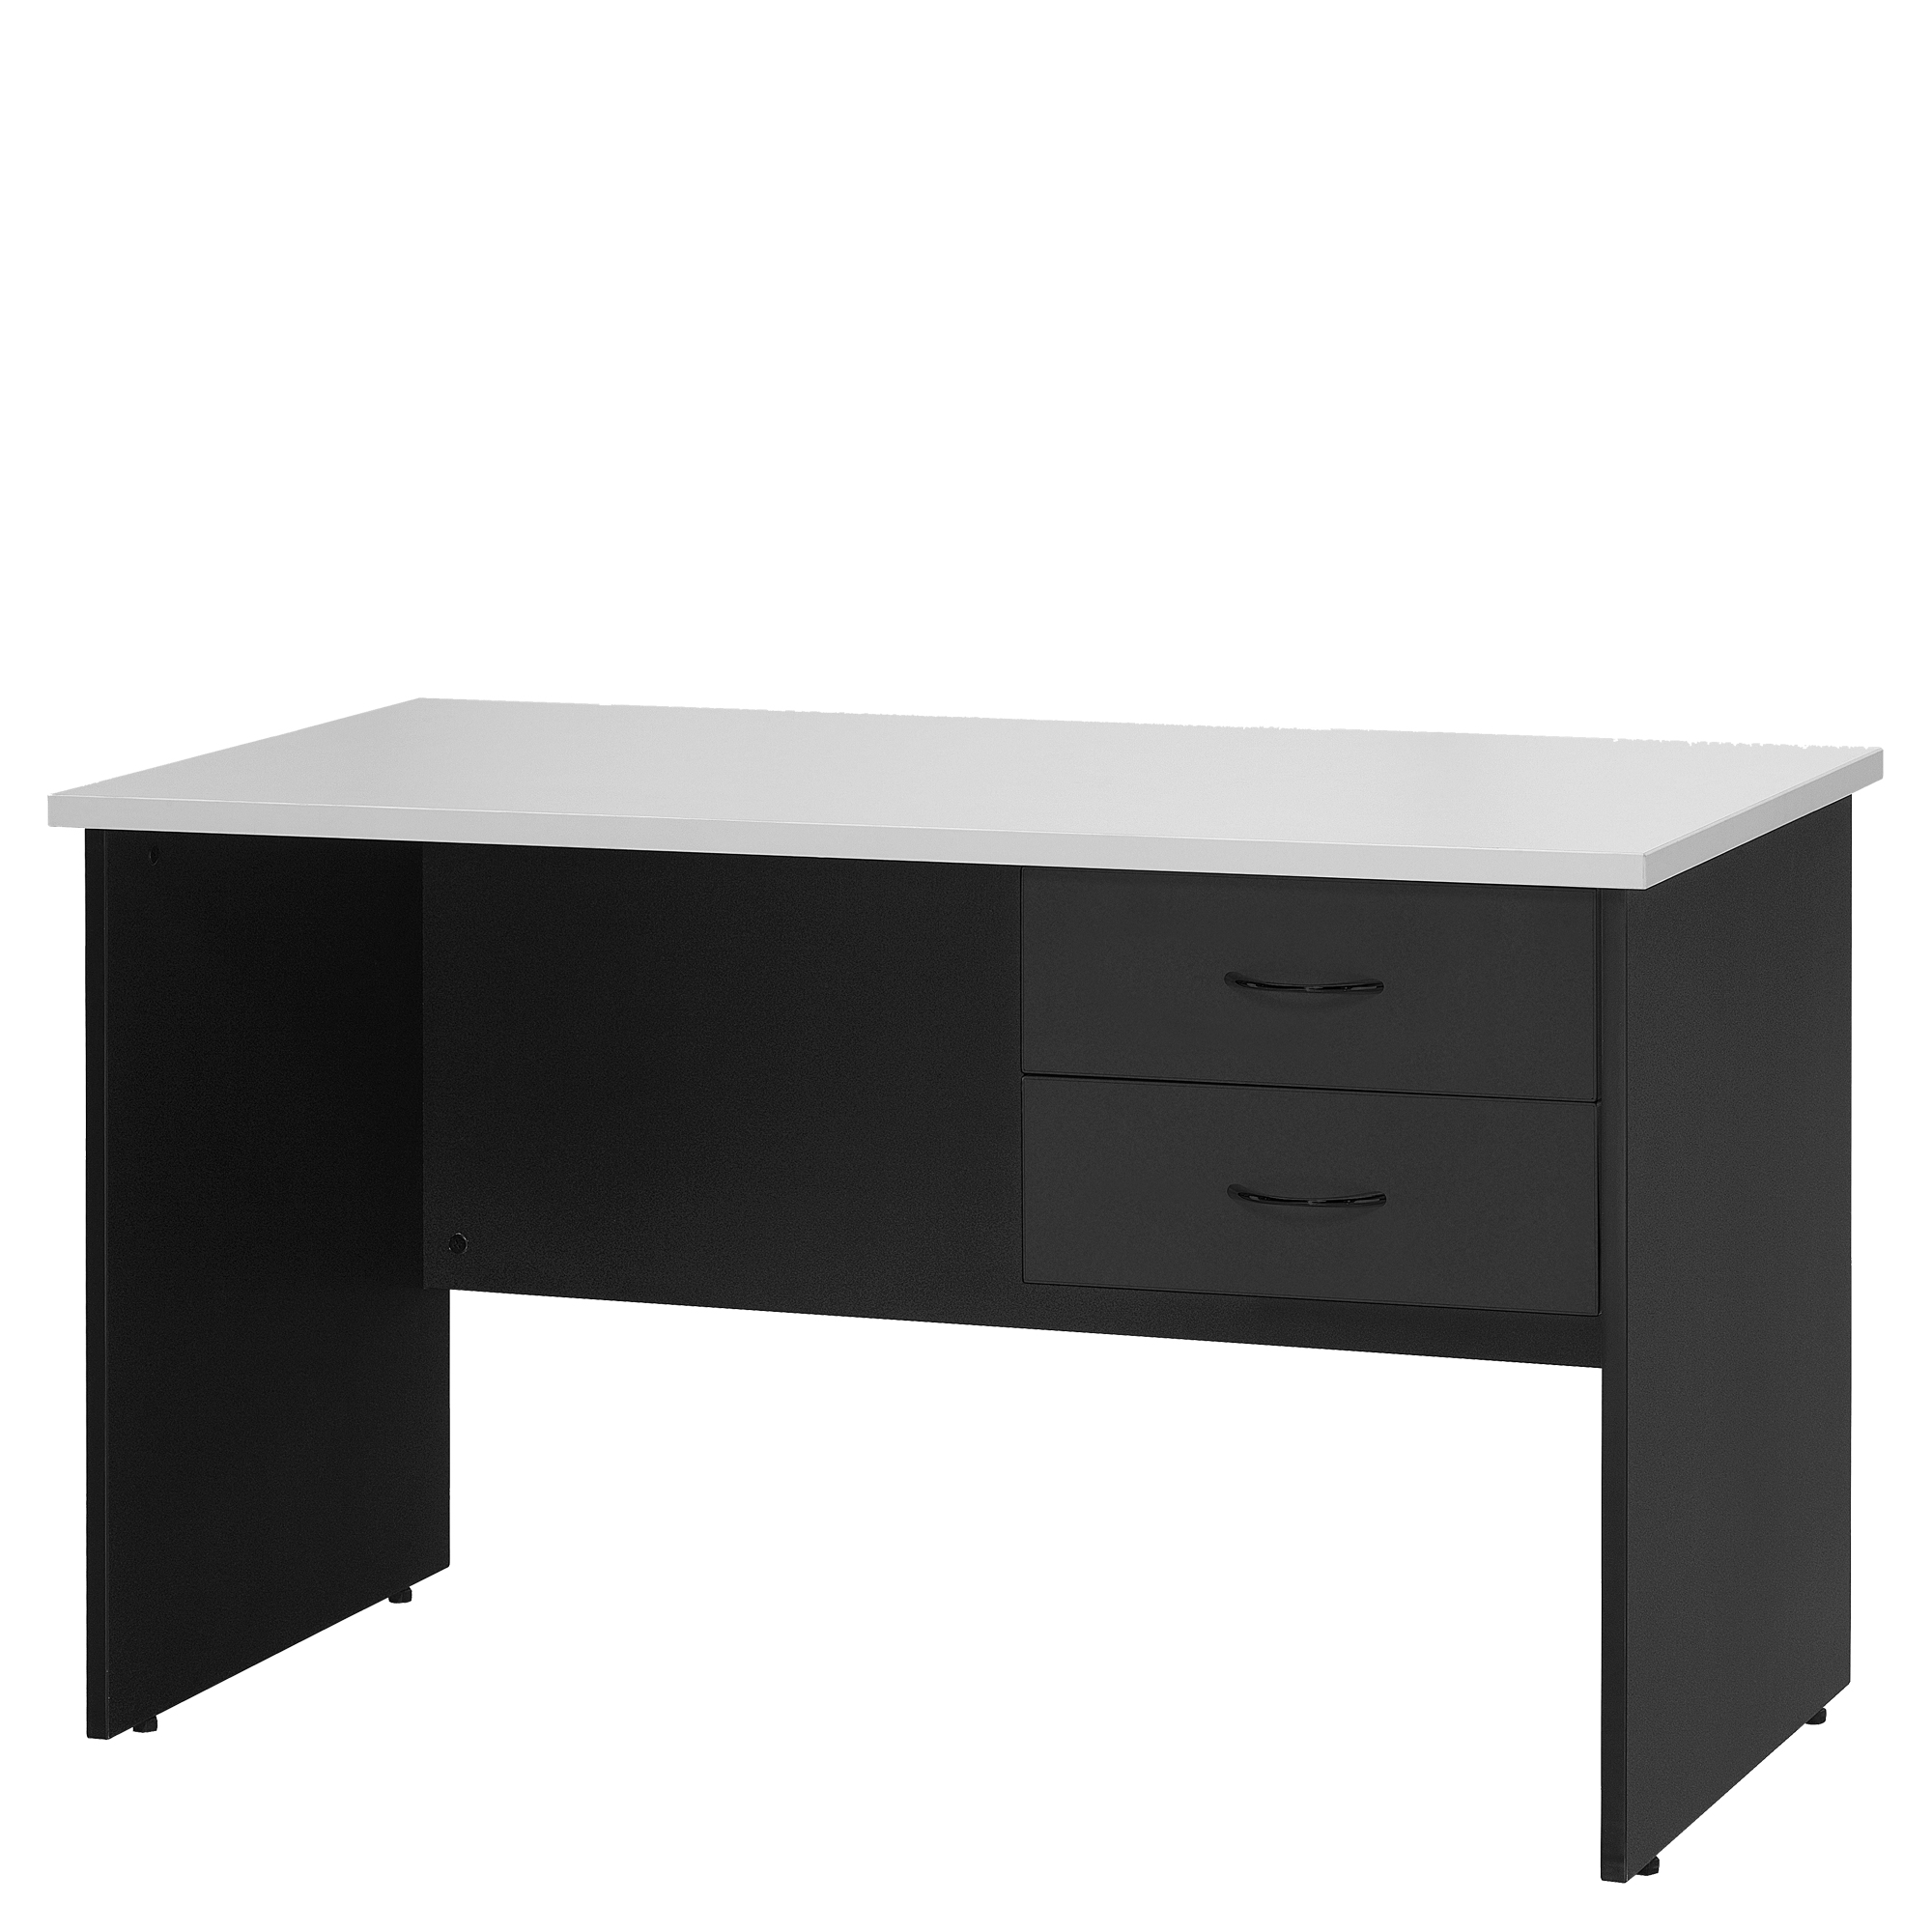 Oxley Student Desk With Drawers Logan Ascot Melbourne